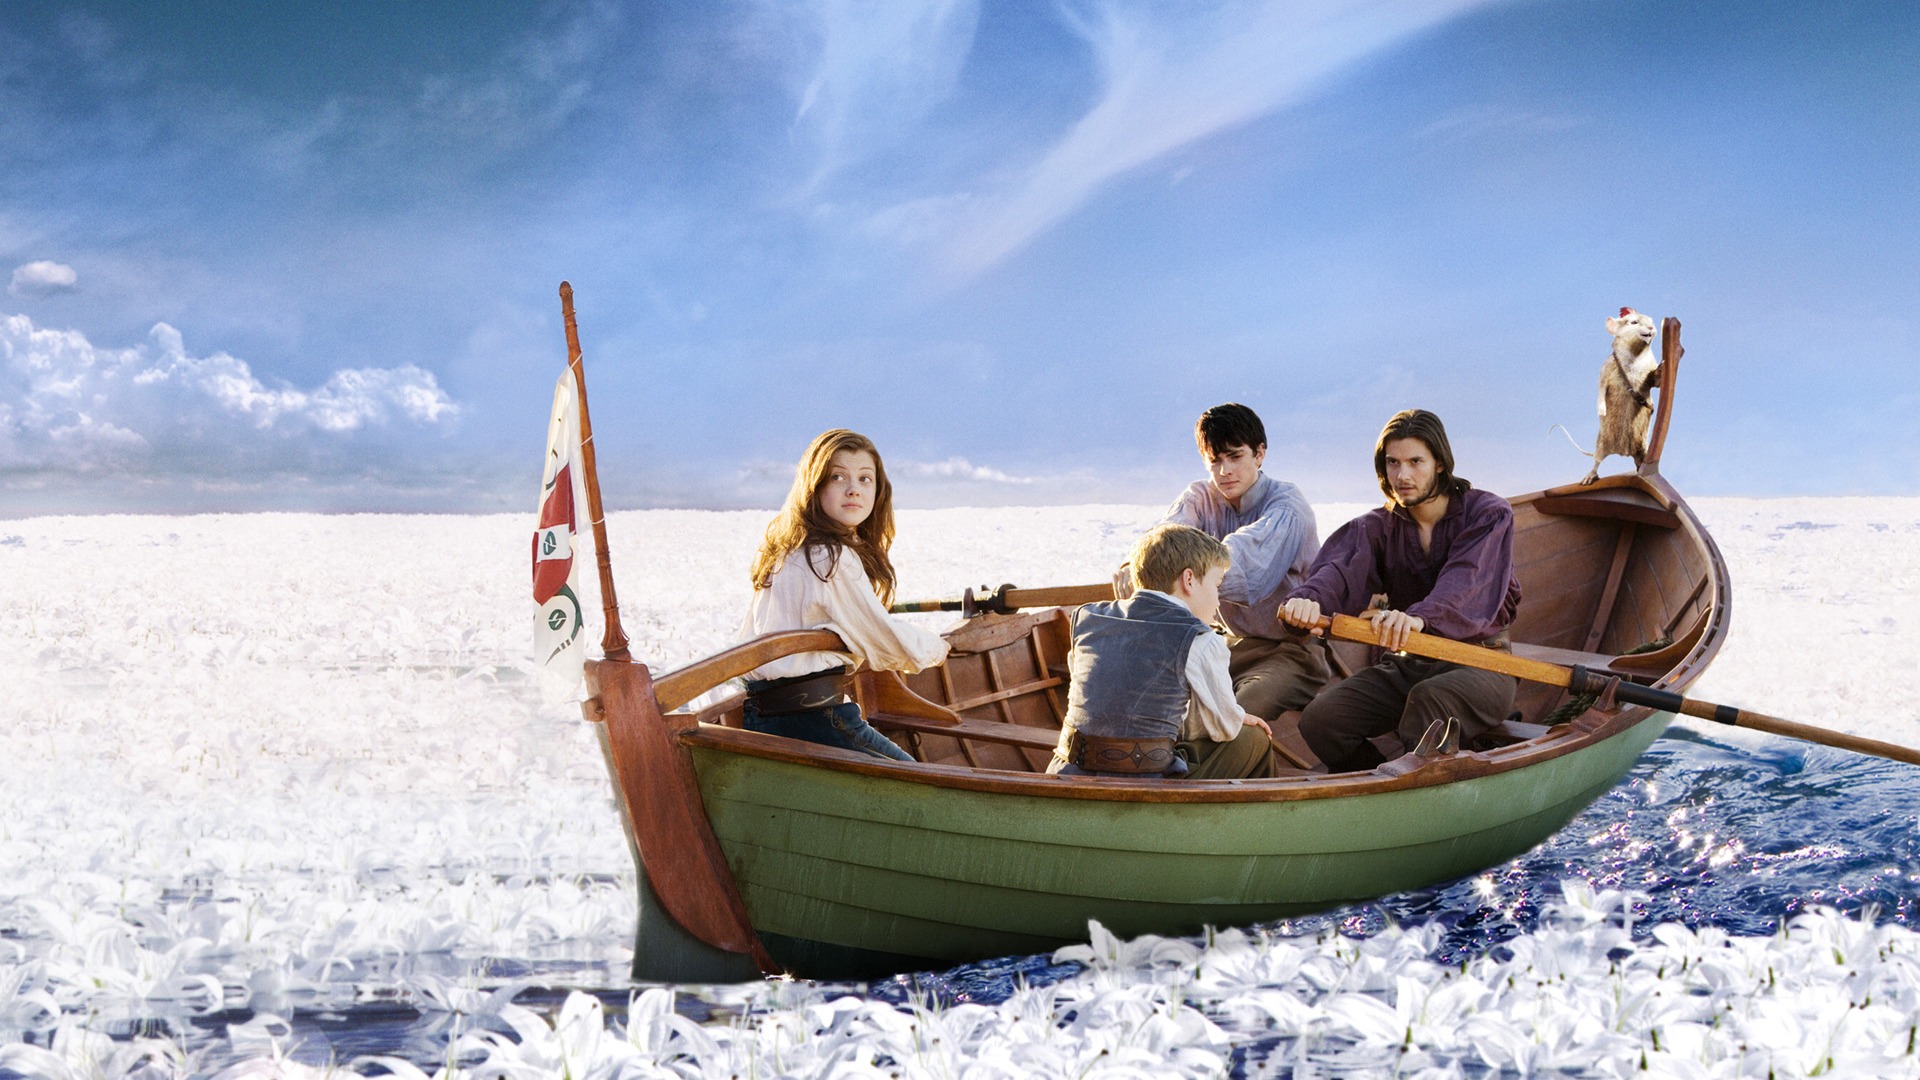 The Chronicles of Narnia: The Voyage of the Dawn Treader wallpapers #12 - 1920x1080